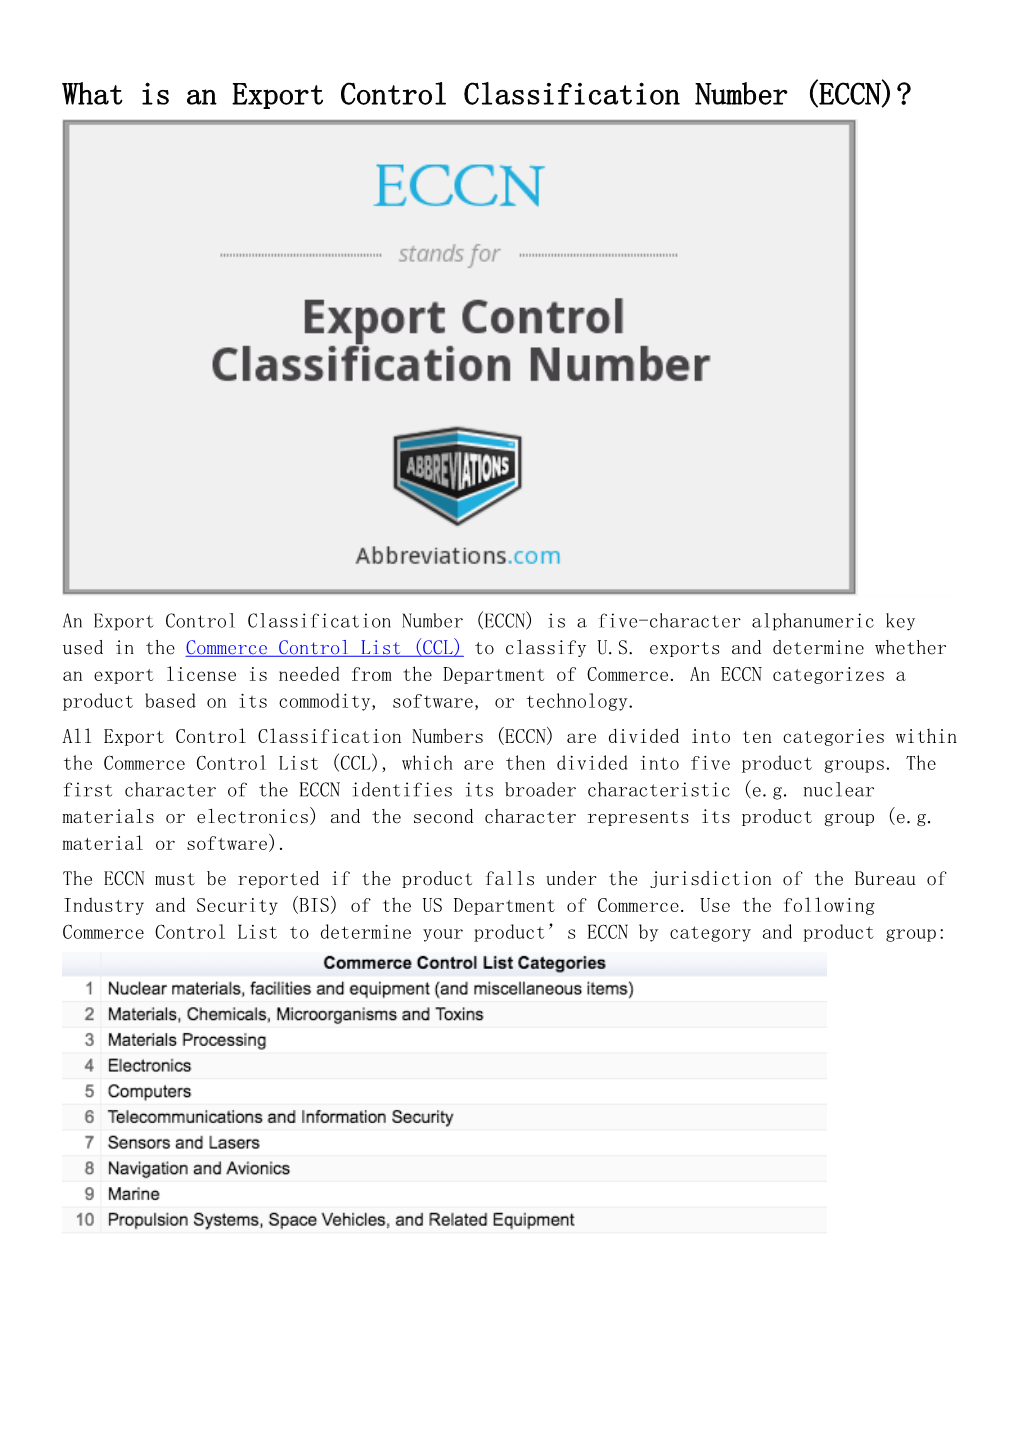 What Is an Export Control Classification Number (ECCN)?